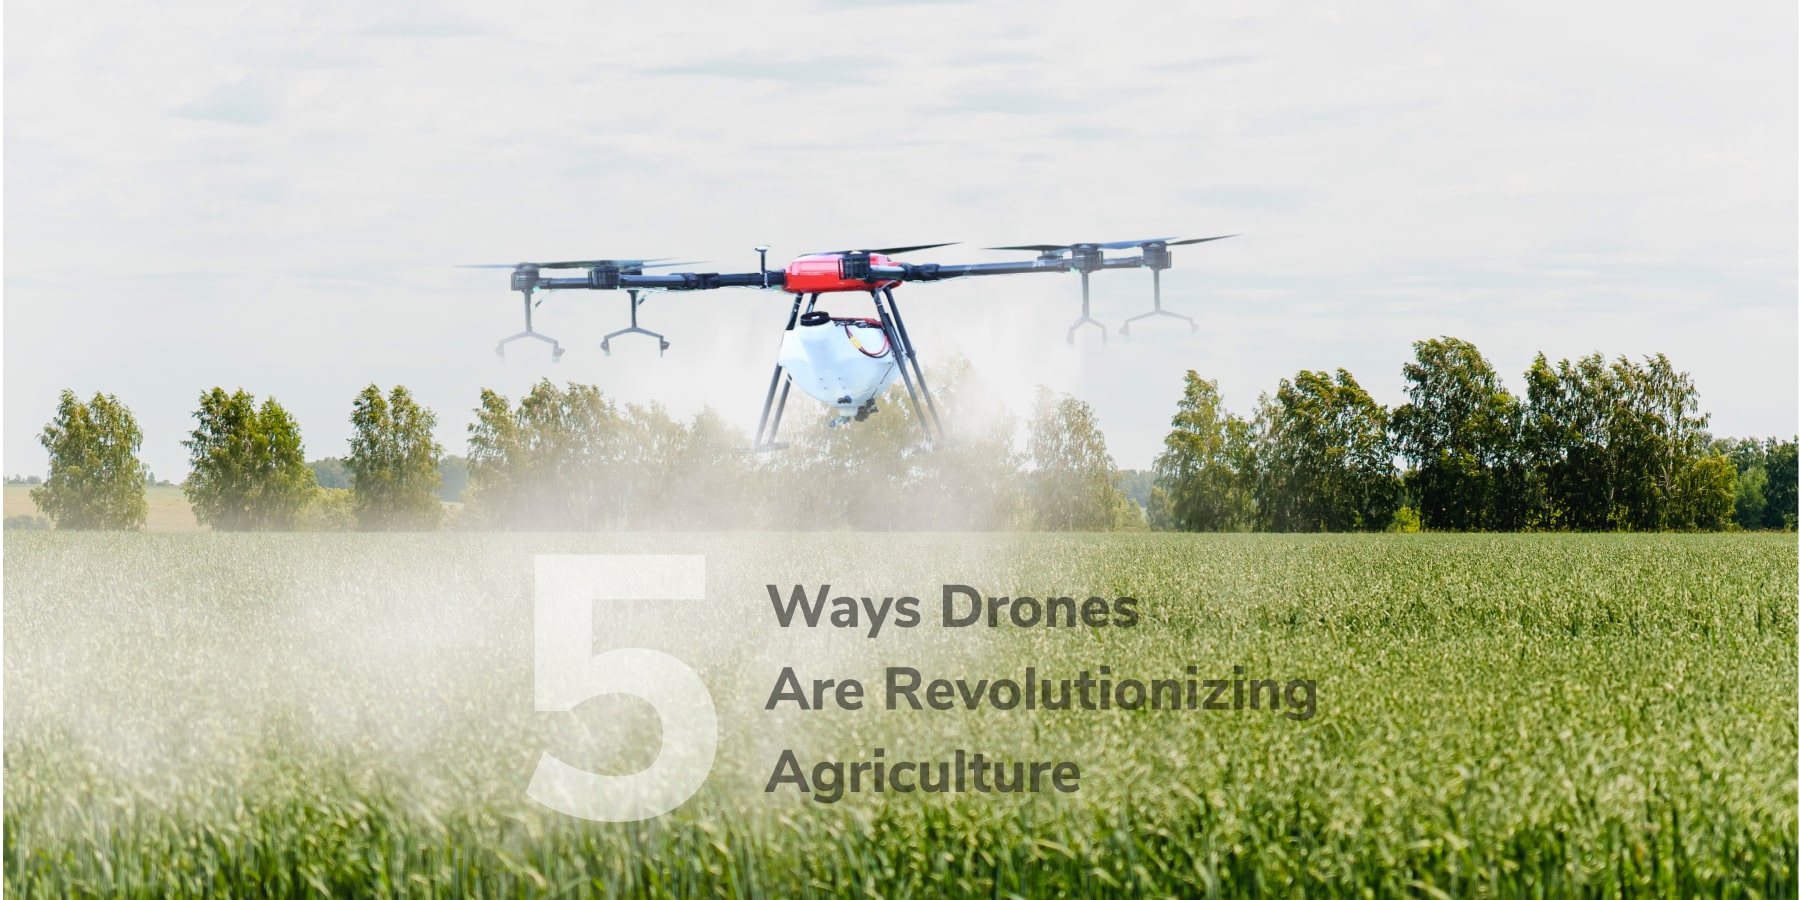 5 Ways Drones Are Revolutionizing Agriculture